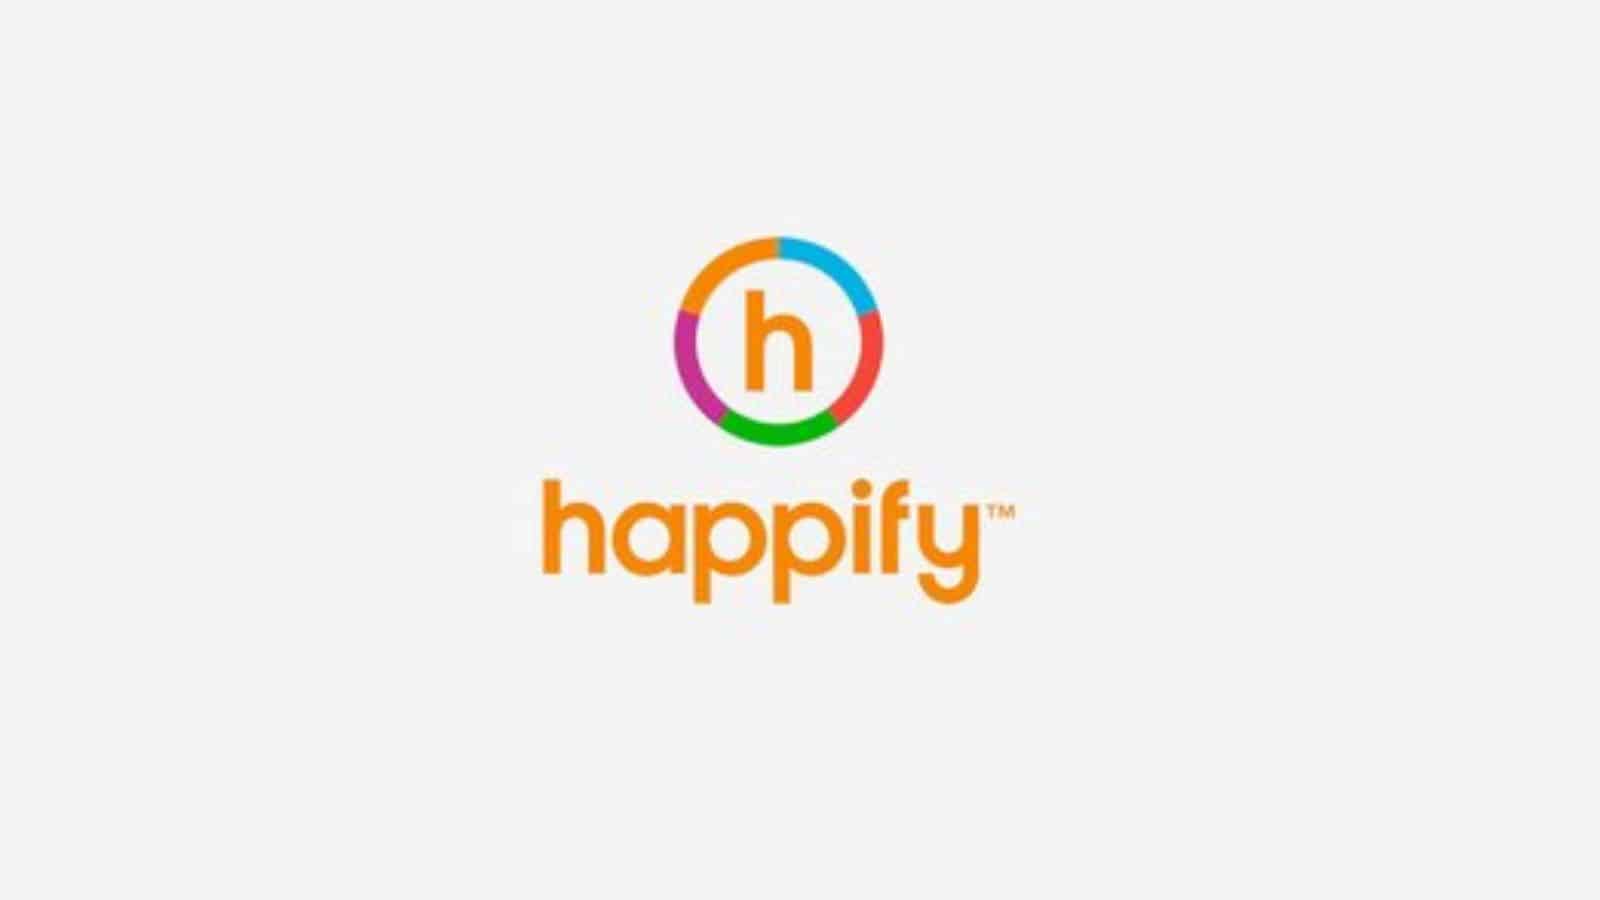 <p>Backed by science, <a href="https://happify.com/" rel="noopener external noreferrer">Happify</a> helps you overcome negative thoughts, stress, and life’s challenges. It’s a platform for building resilience and forming positive habits for a happier life. Happify provides solutions for individuals and organizations. By integrating Happify into their daily routines, users can effectively manage their emotions and improve their mental health.</p>